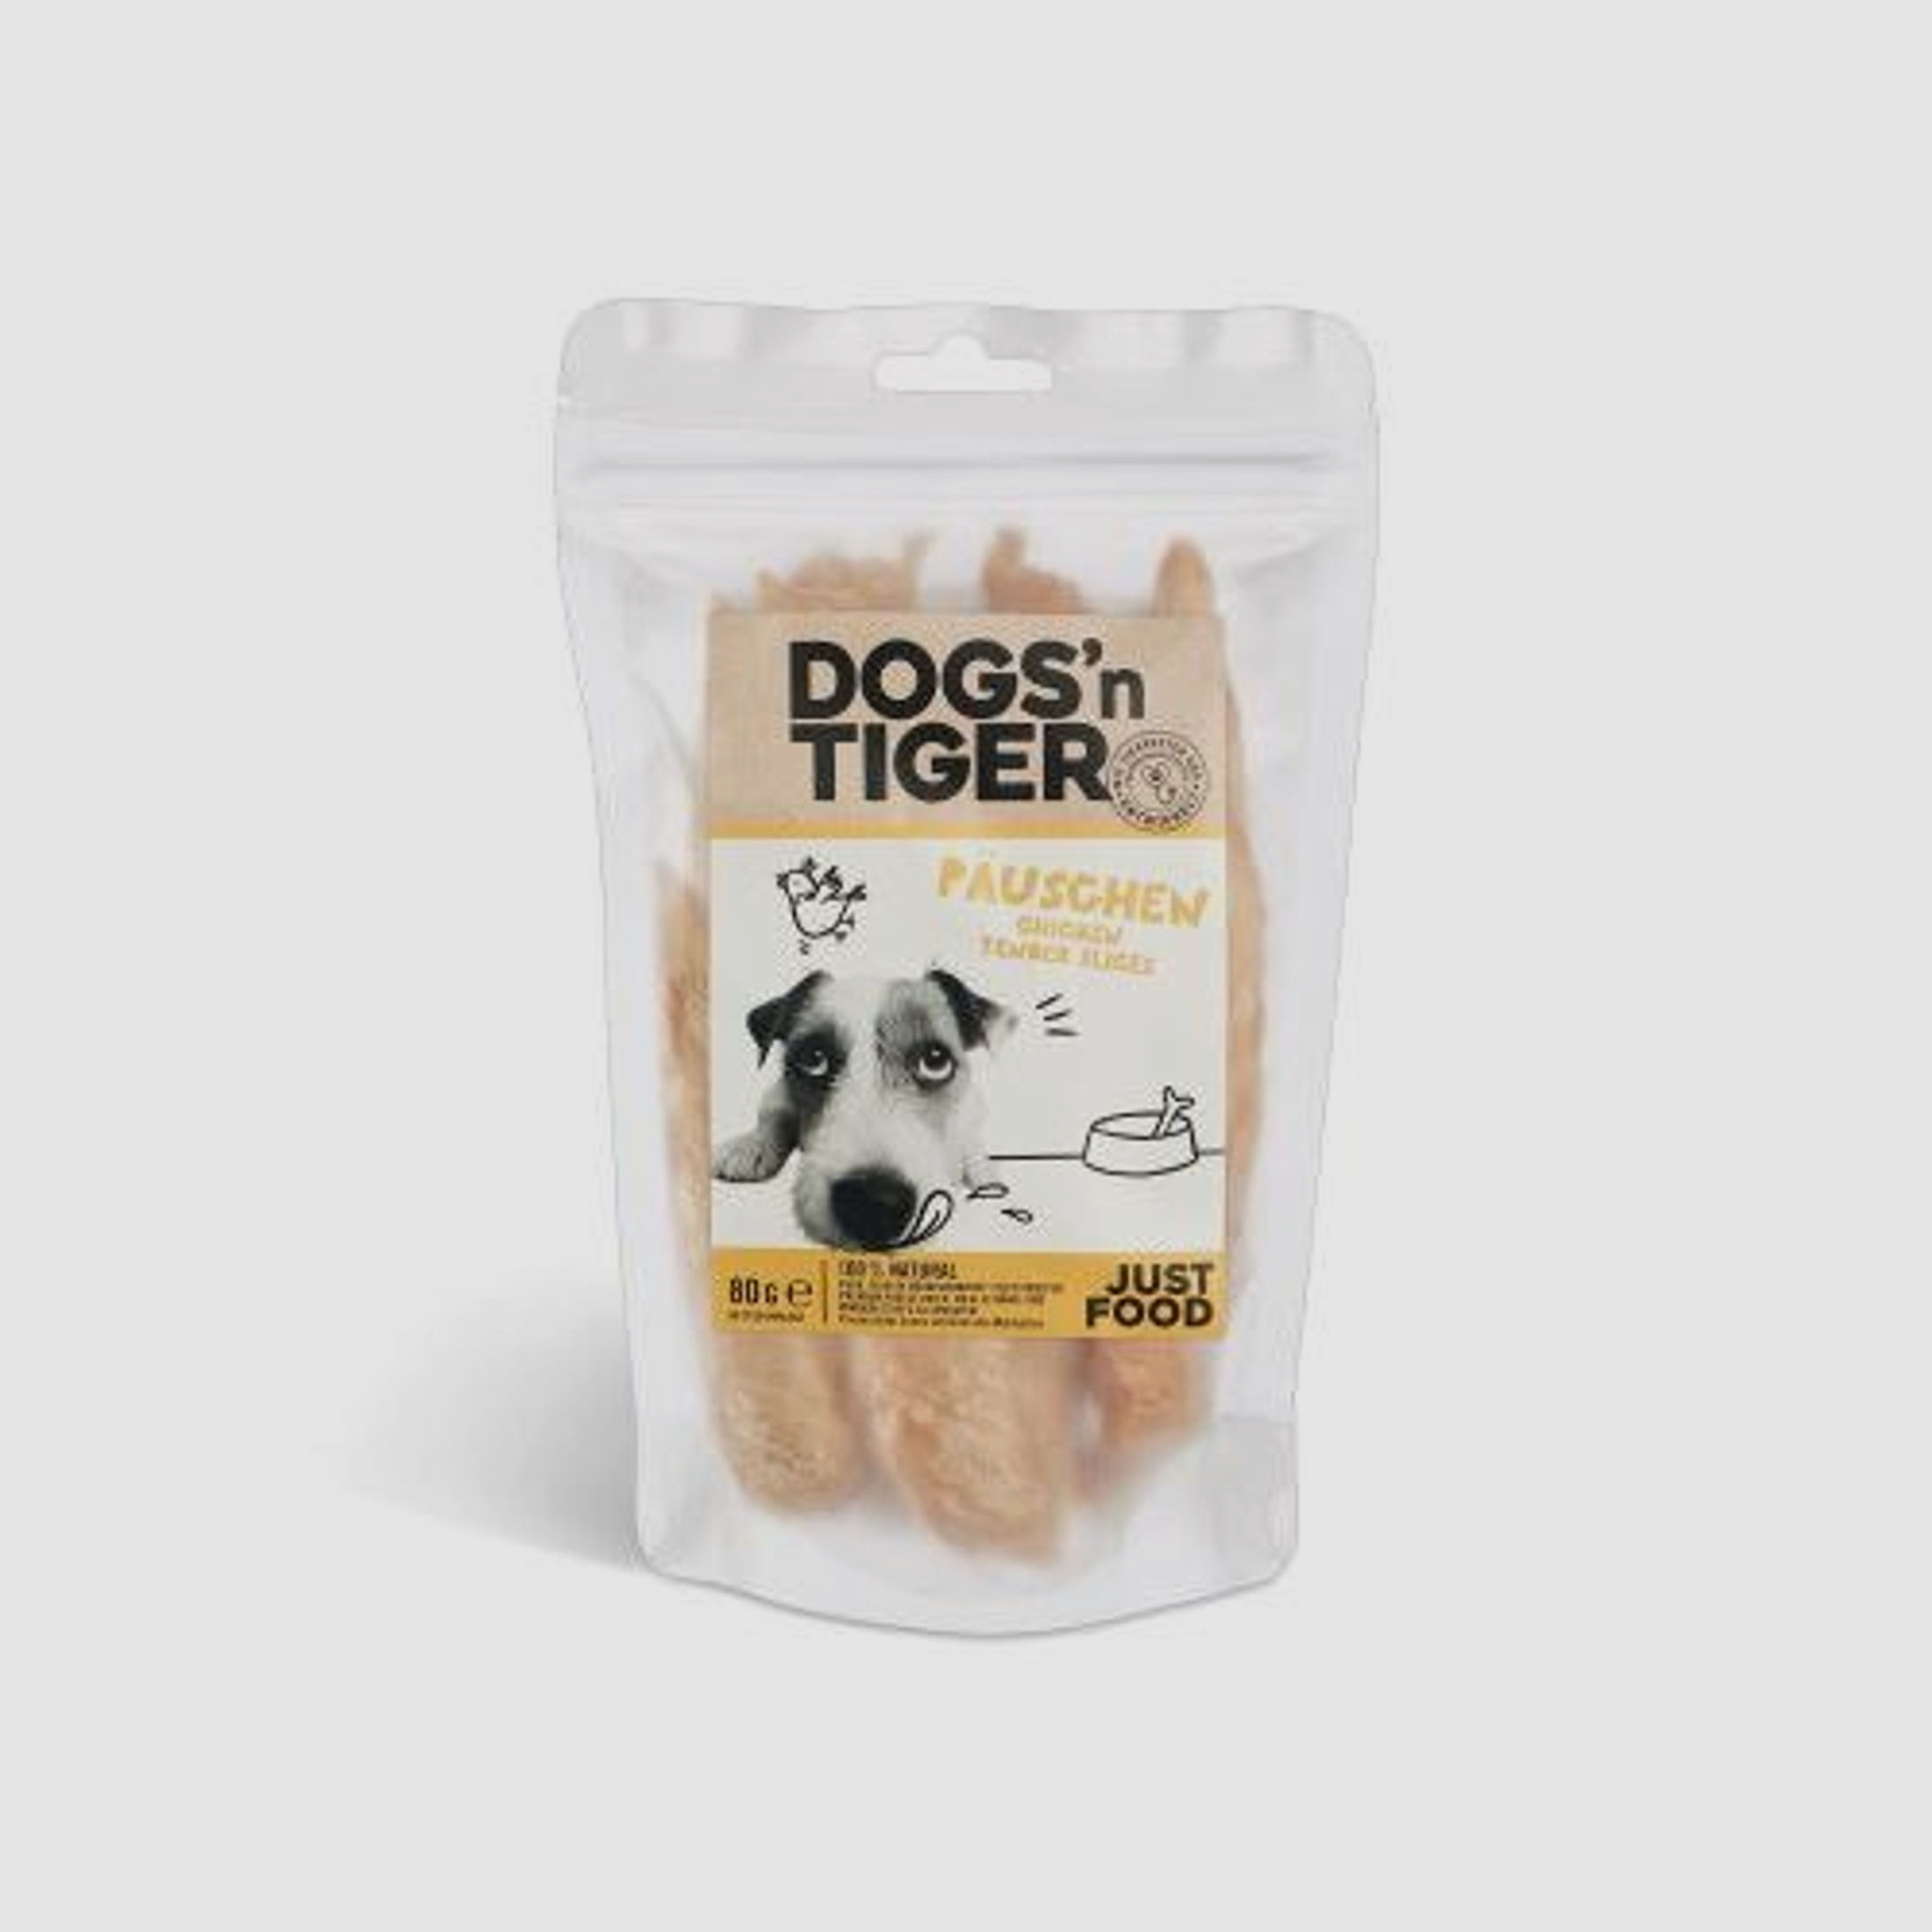 Dogs `n Tiger Hundesnack P?uschen Huhn 80g 1 St?ck